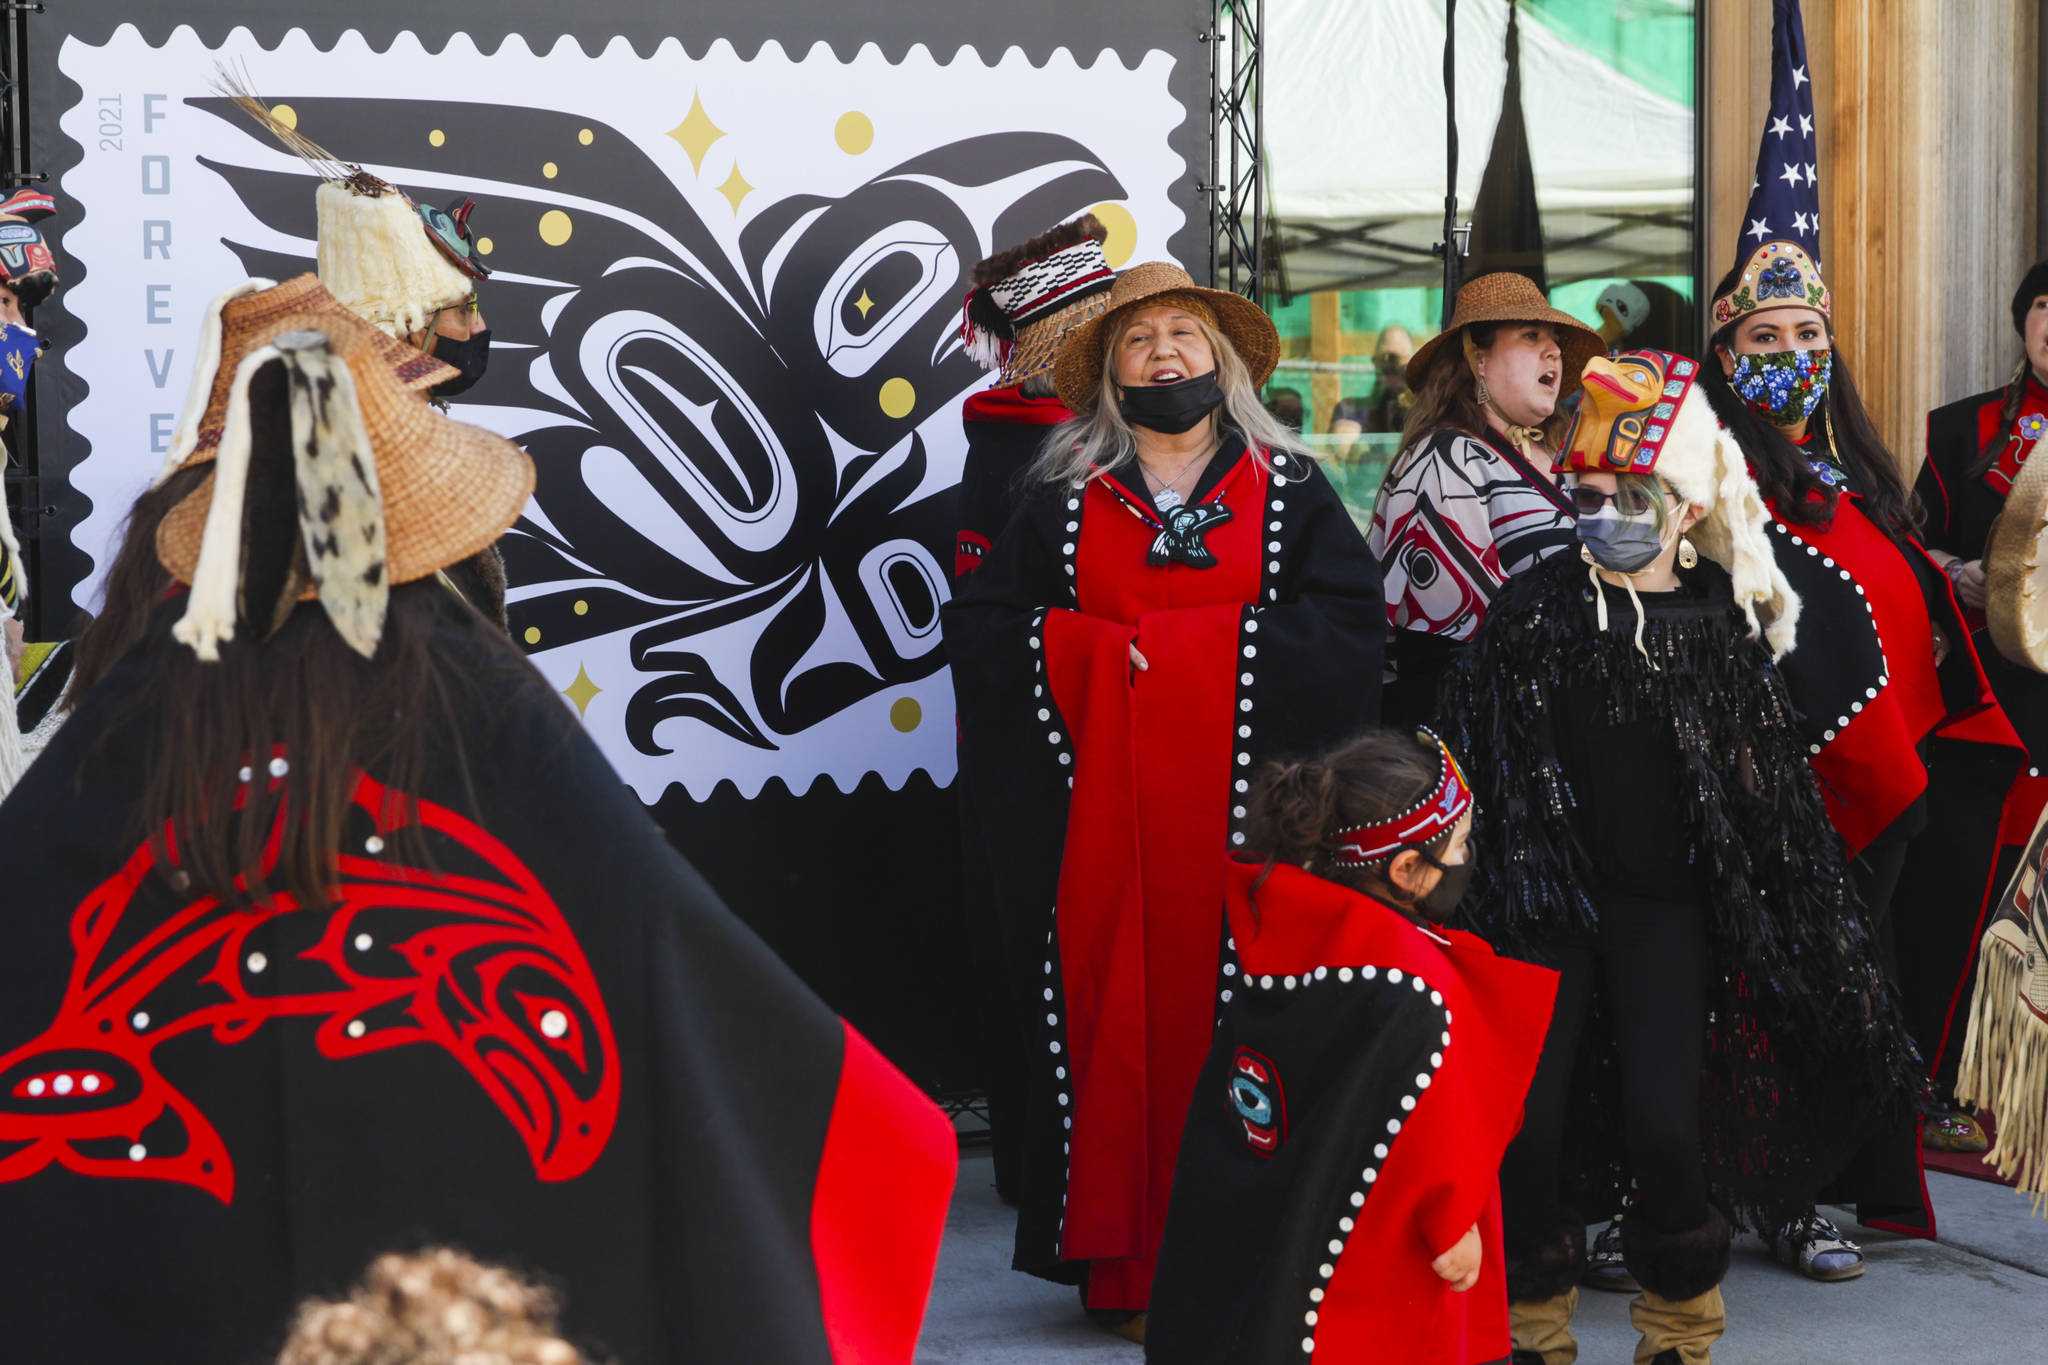 Michael S. Lockett / Juneau Empire 
Dancers perform during an official release ceremony for the Raven Story stamp in front of the Sealaska Heritage Institute’s Walter Soboleff Building on Friday, July 30, 2021.